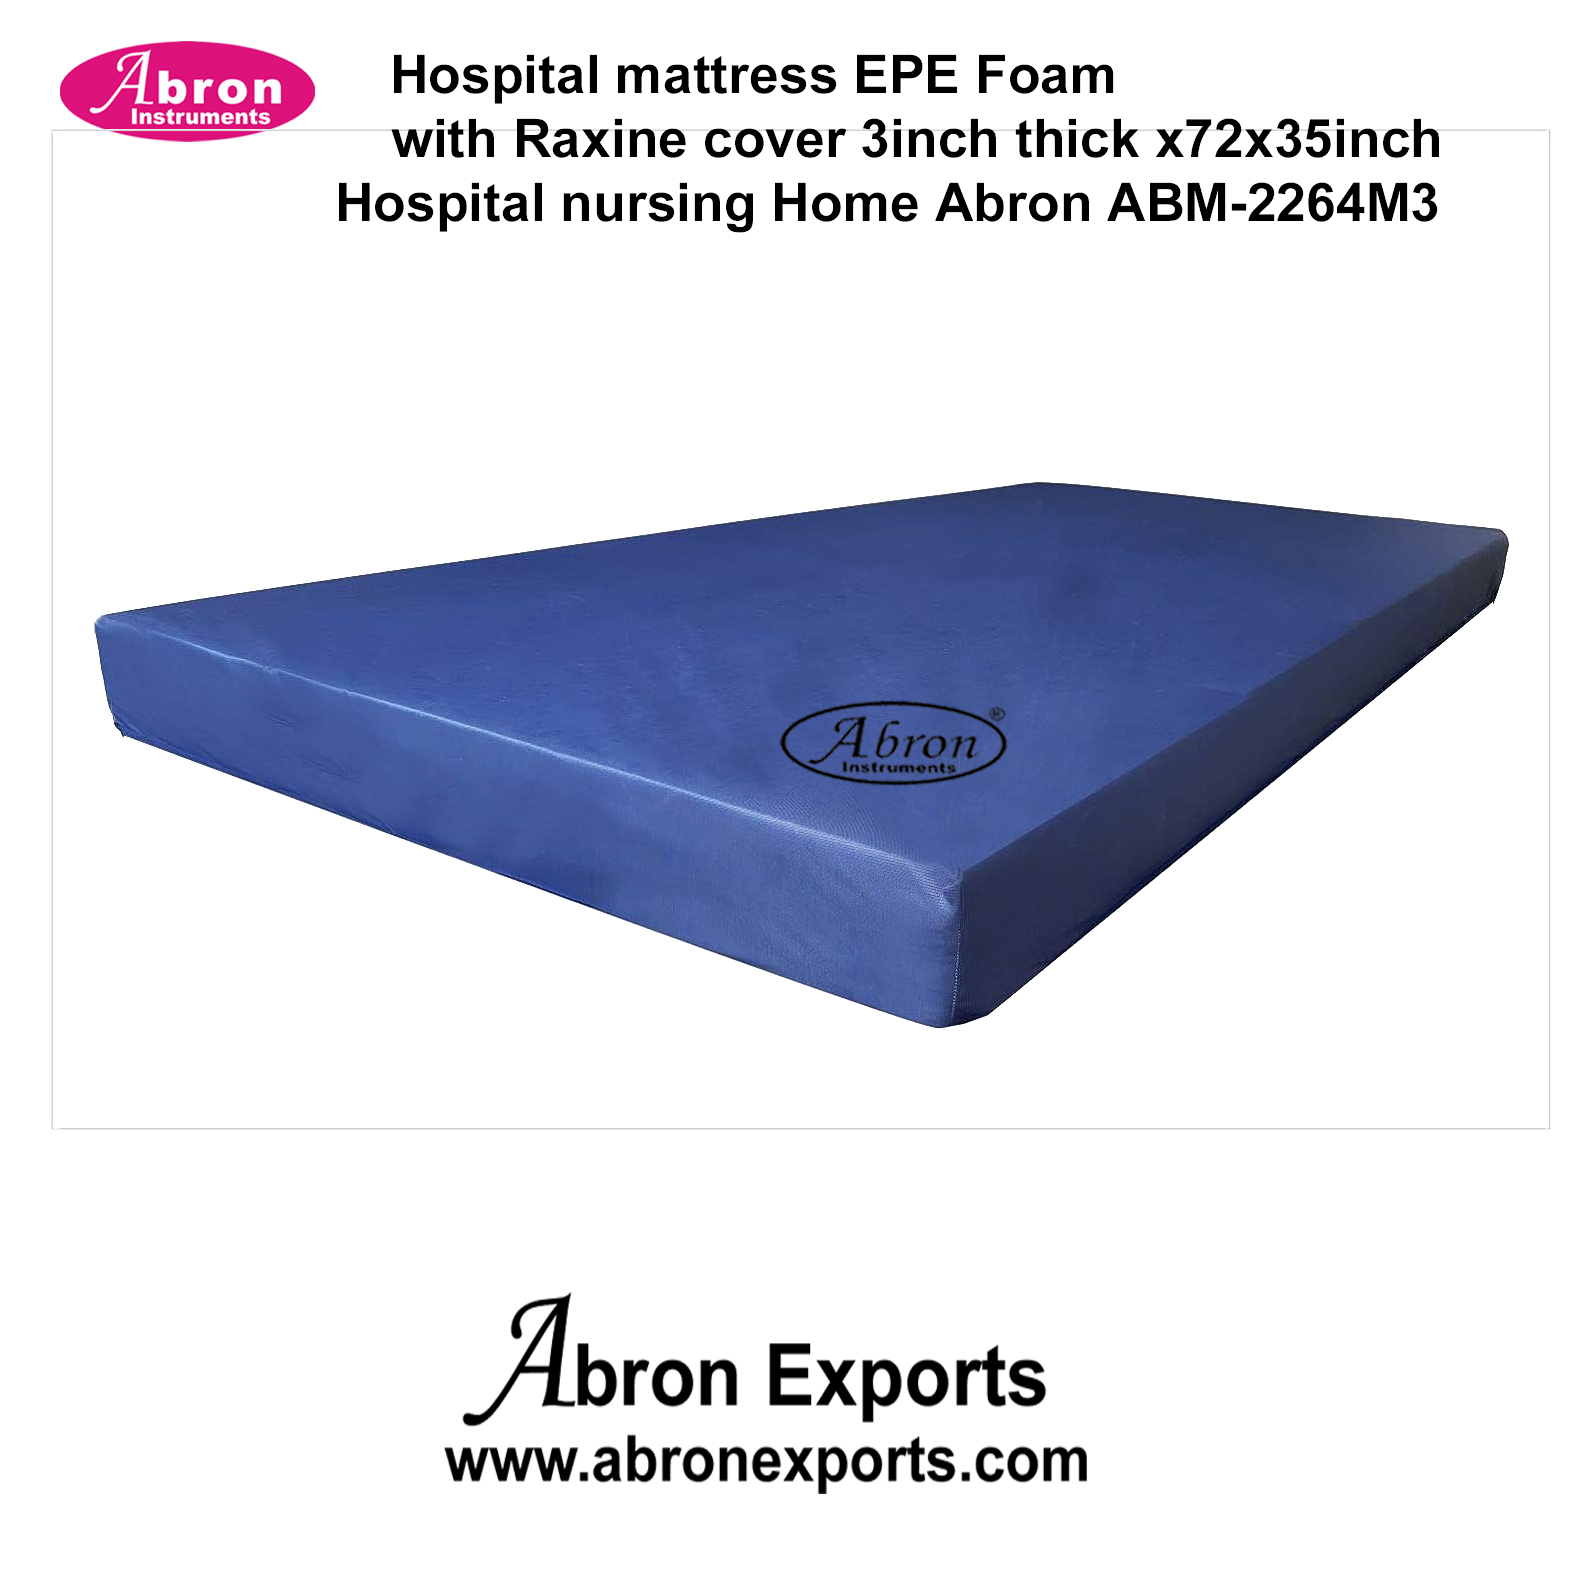 Hospital Mattress EPE Foam with Raxine Cover 3 inch thick x72x35 inch Hospital Nursing Home Abron ABM-2264M3 